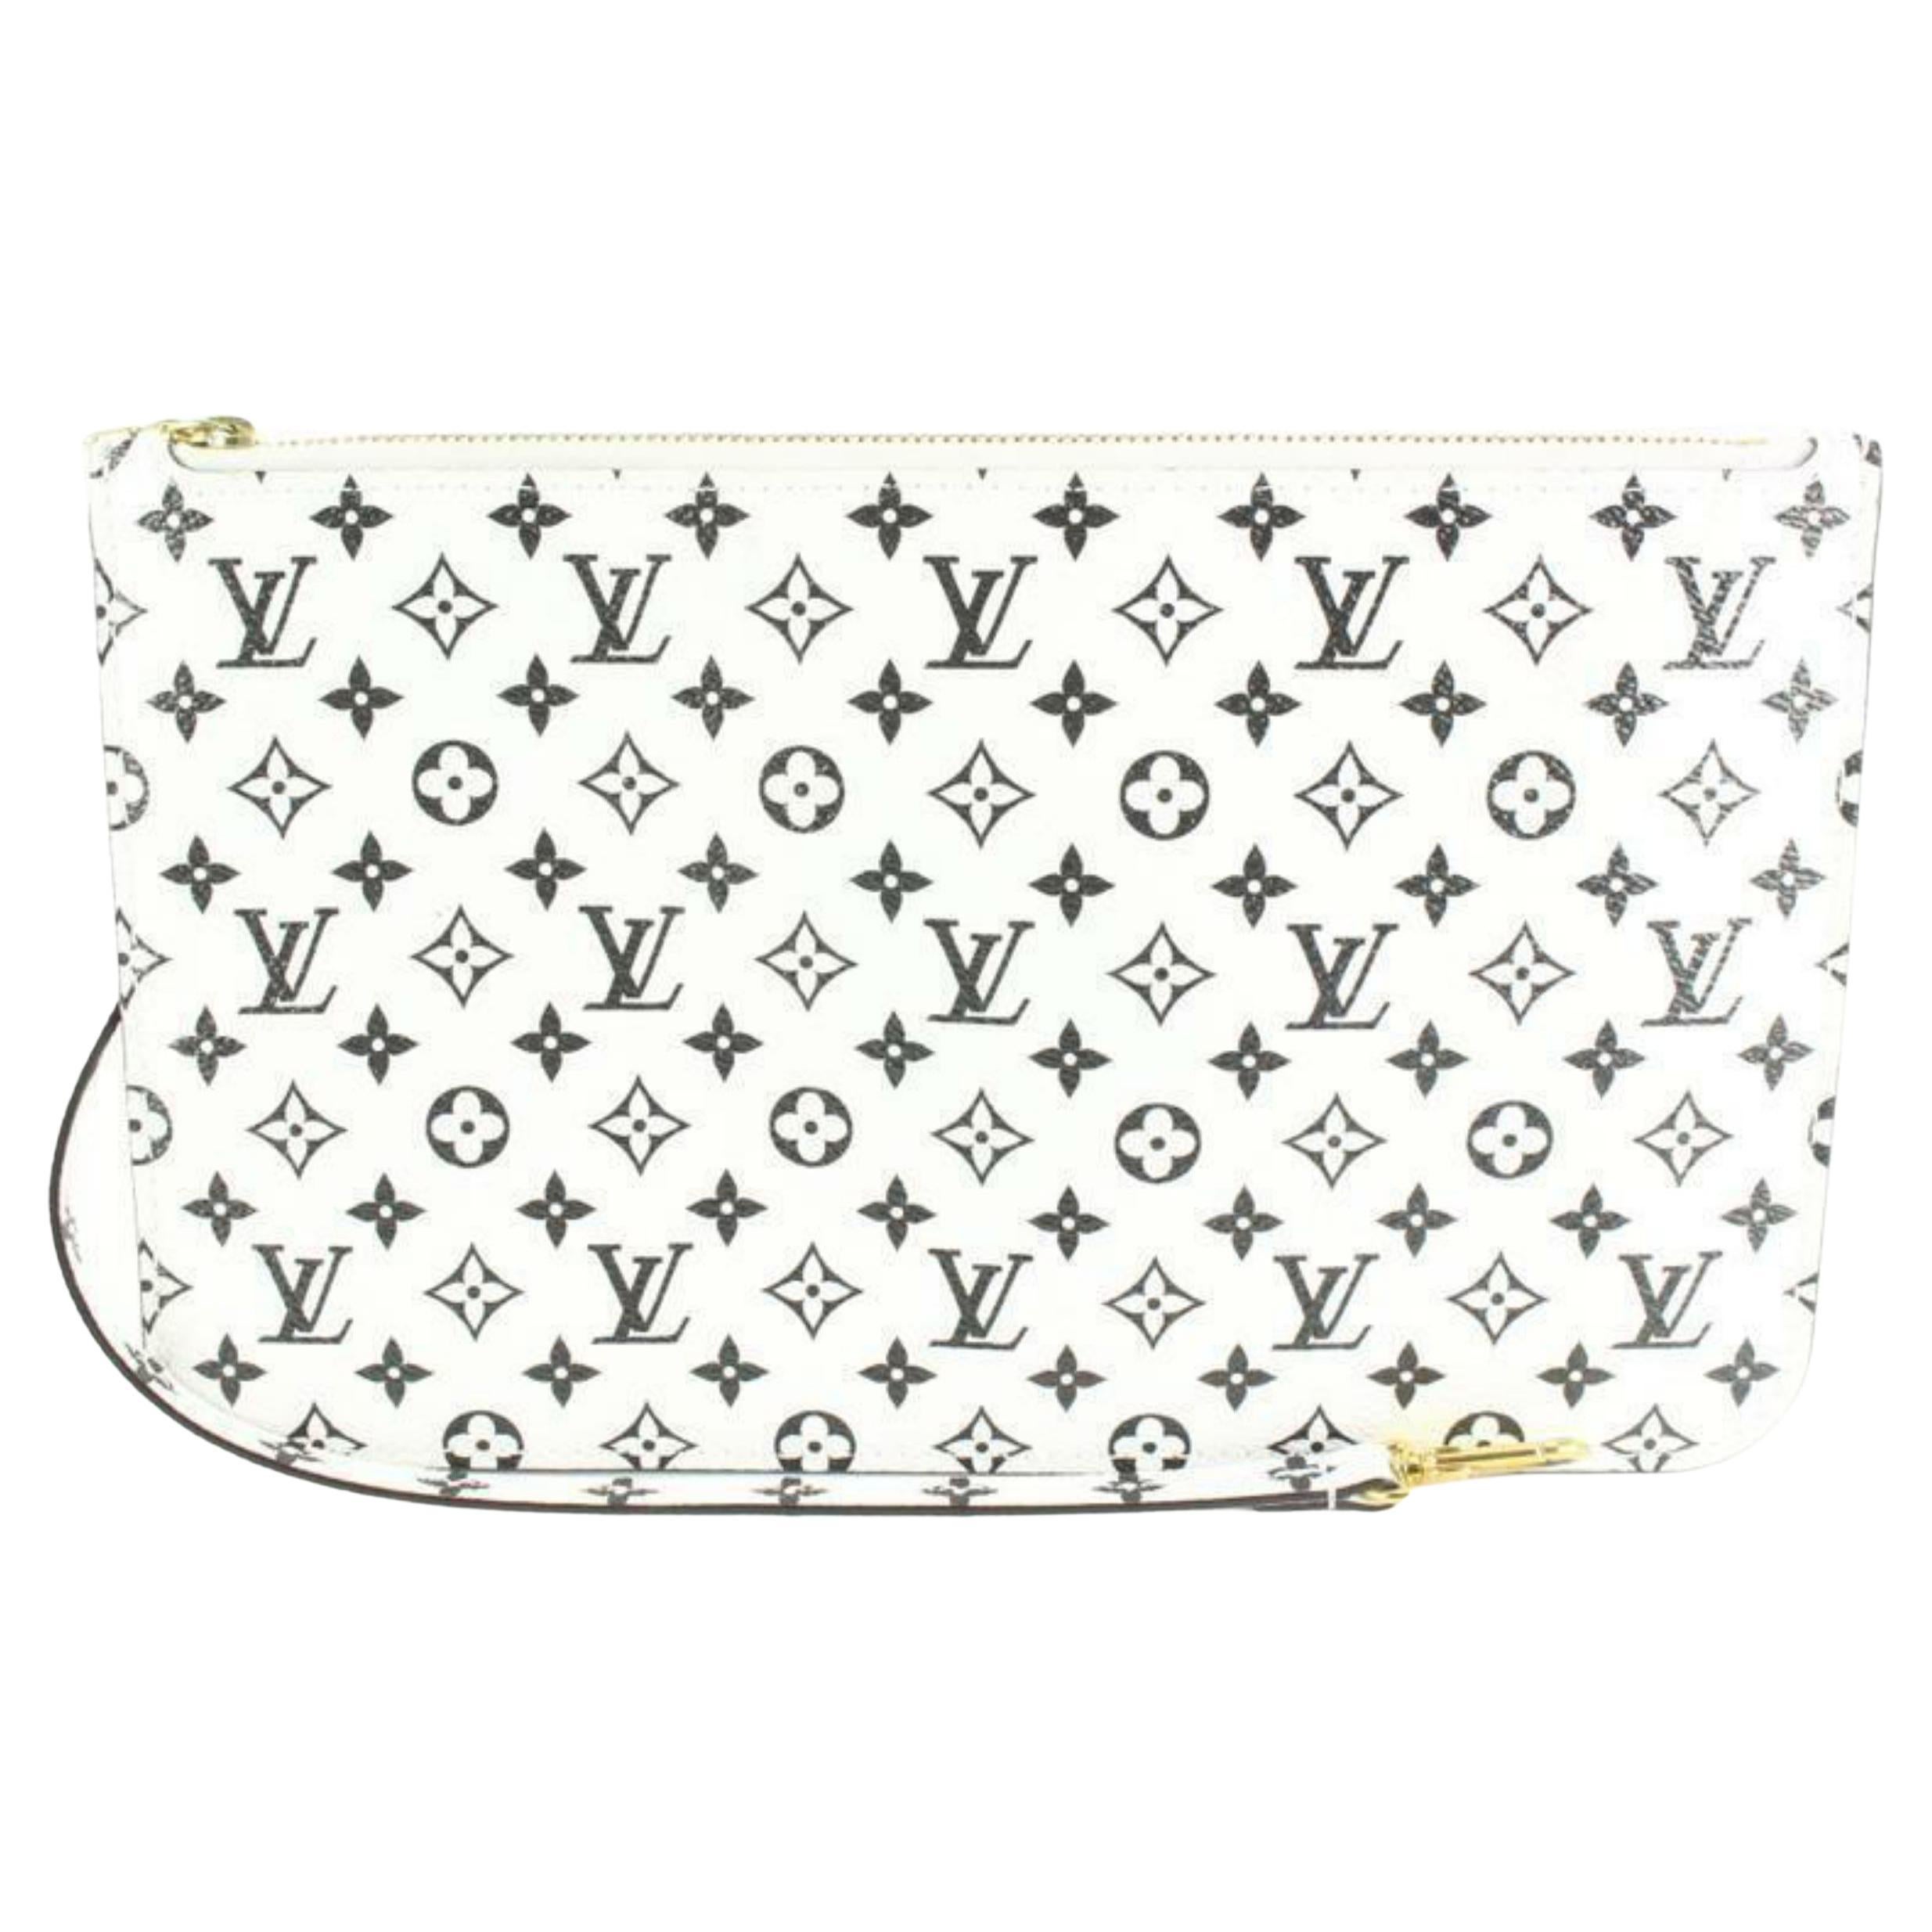 Louis Vuitton Neverfull Gm White - 2 For Sale on 1stDibs  never fold louis  vuitton, louis vuitton neverfull white, louis vuitton white neverfull